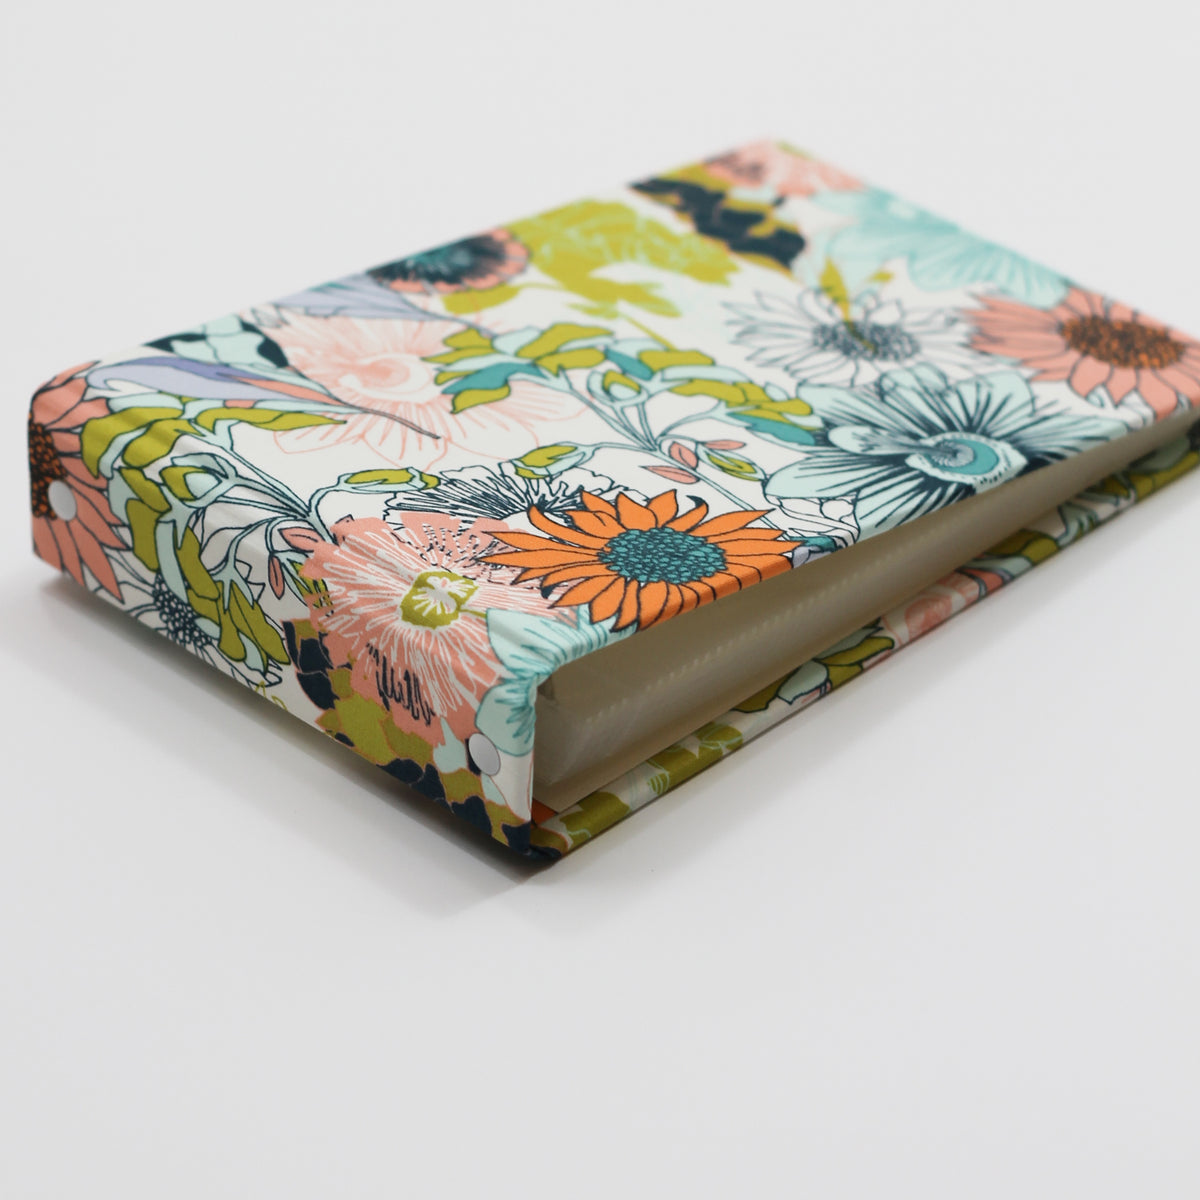 Small Photo Binder | for 4x6 Photos | with Retro Floral Fabric Cover